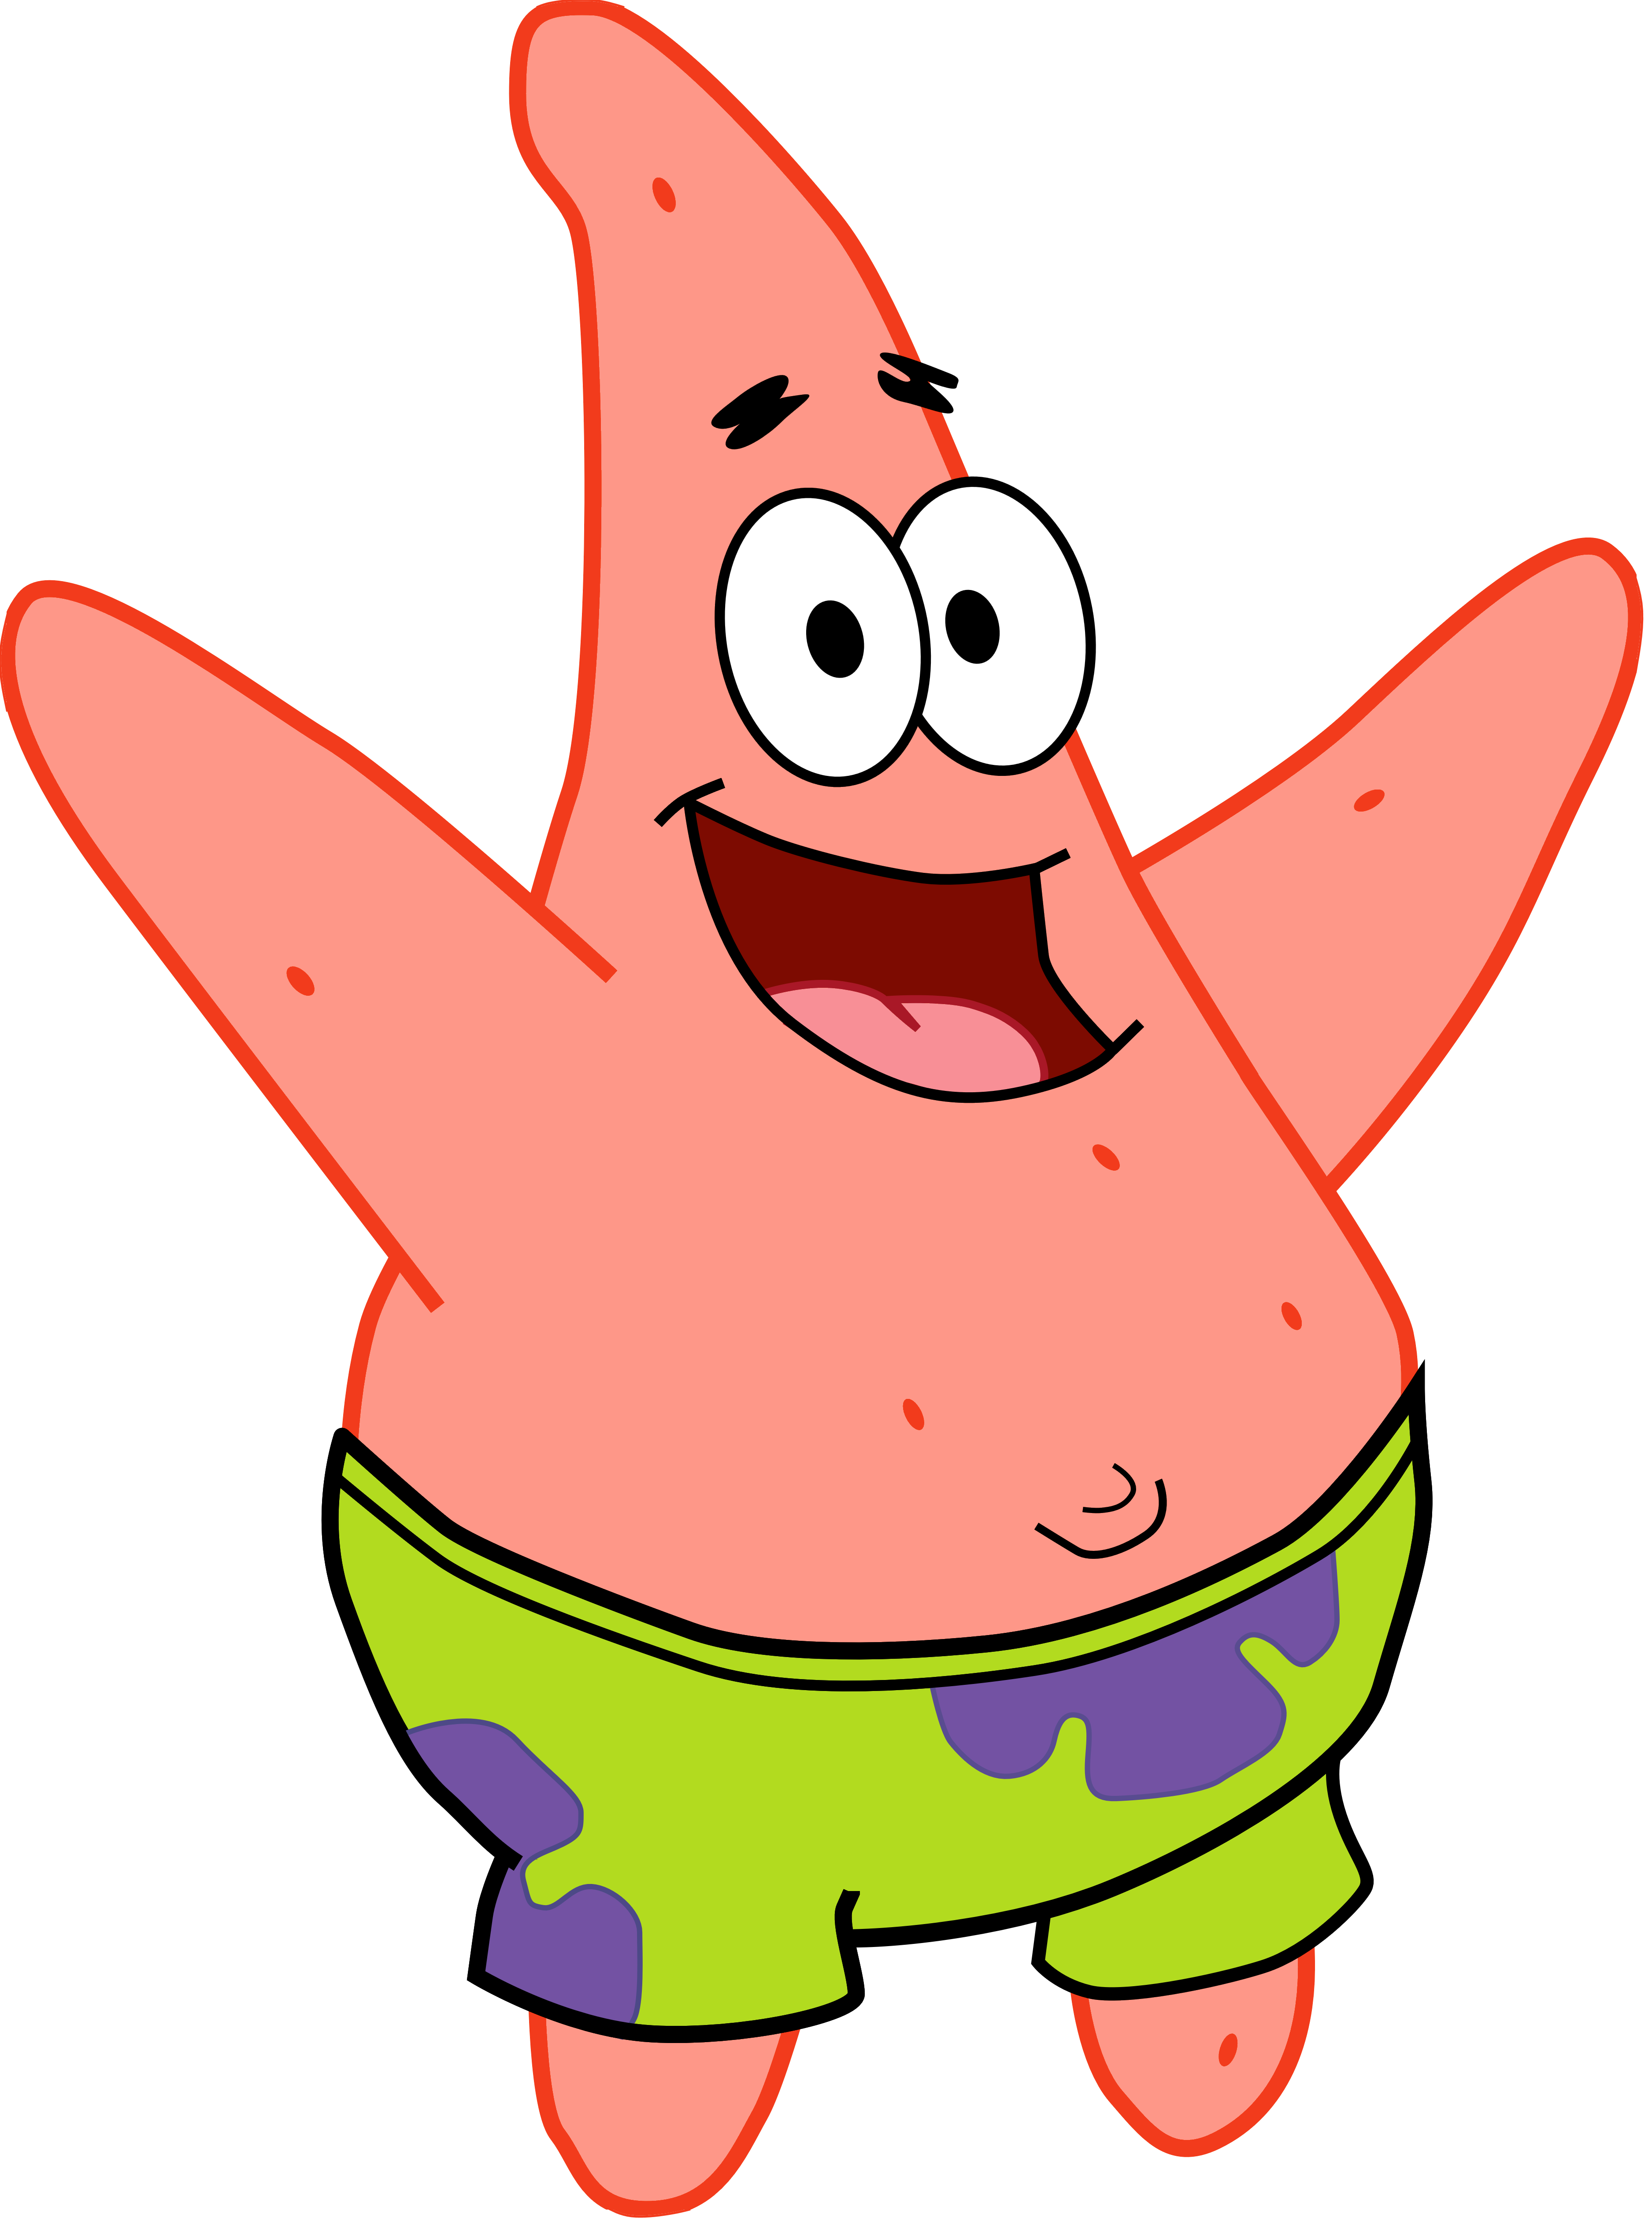 Patrick_Star_picture_logo.png